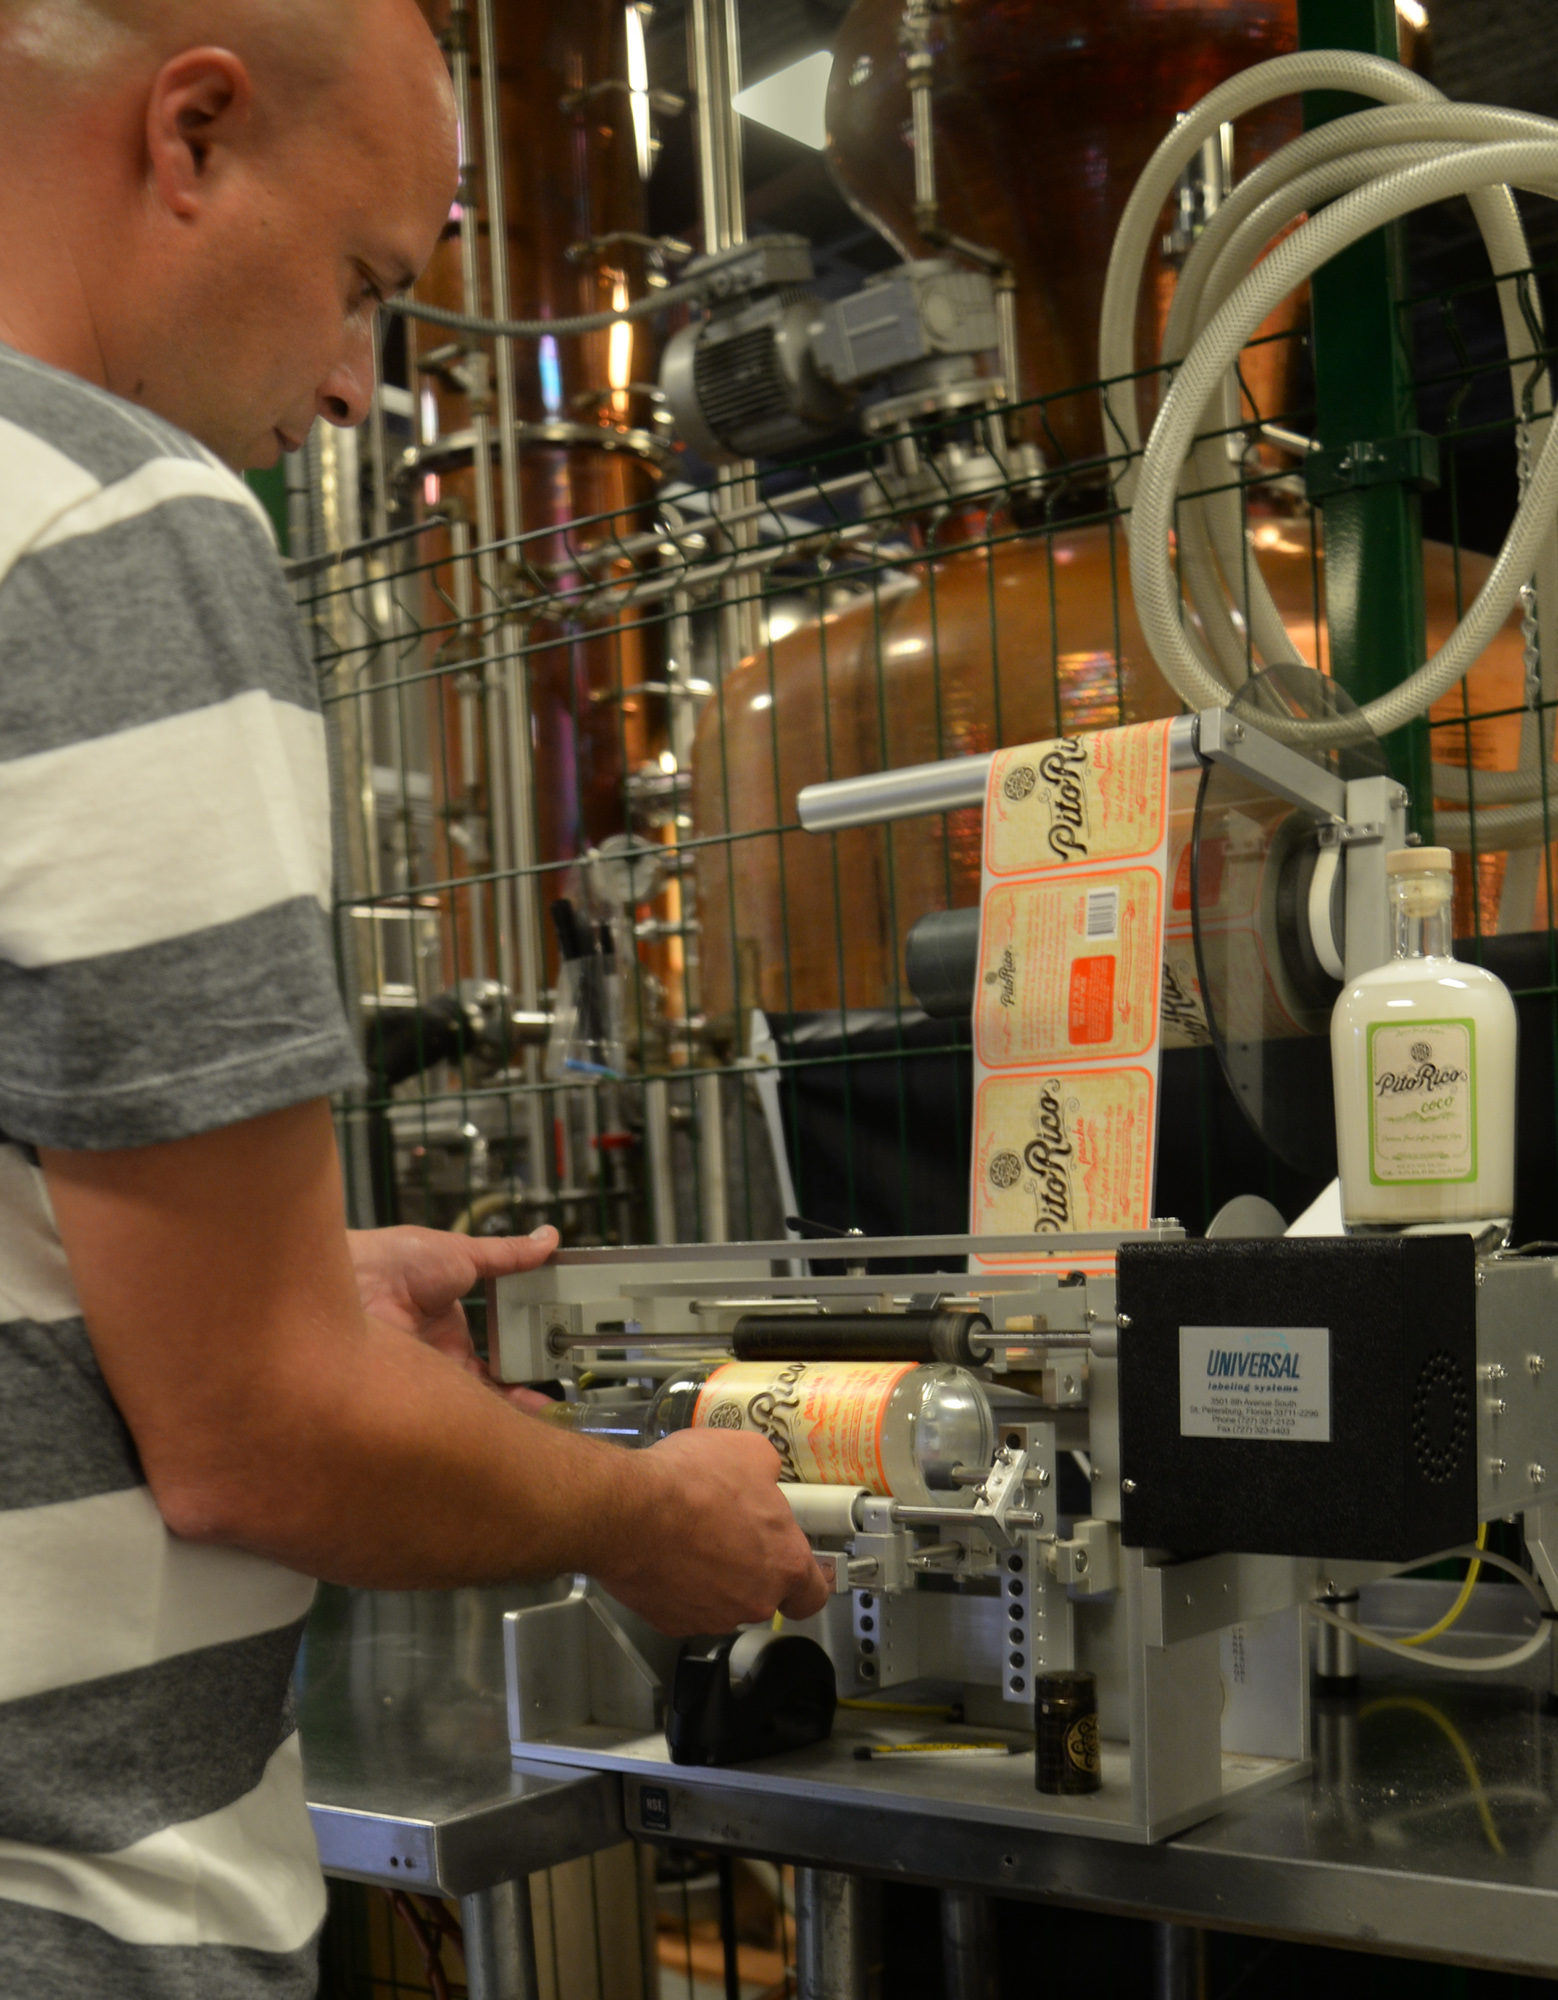 Cesar Torres, the main distiller and blender (official title: Jack of Spades and Trades) at Sol Taino Spirits, positions a rum bottle on a labeling machine. Sol Taino Spirits is the only certified craft distillery in Puerto Rico. Photo by Sarah Price